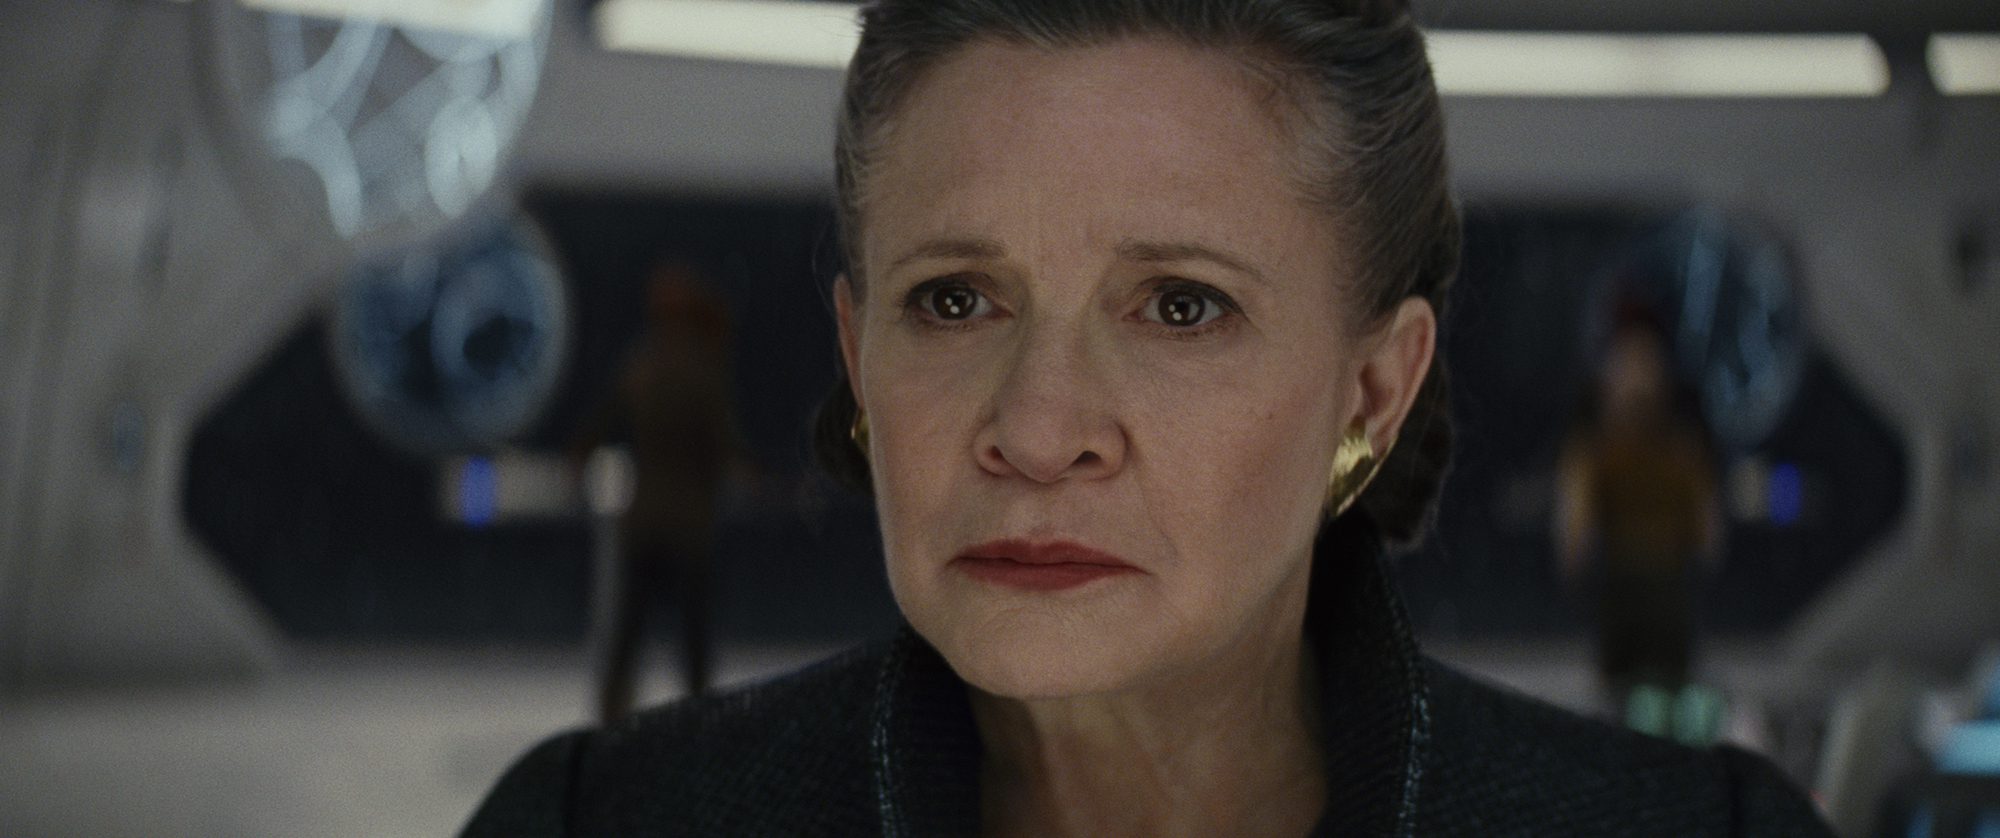 General Leia (Carrie Fisher) in "Star Wars: The Last Jedi" (Walt Disney Pictures)